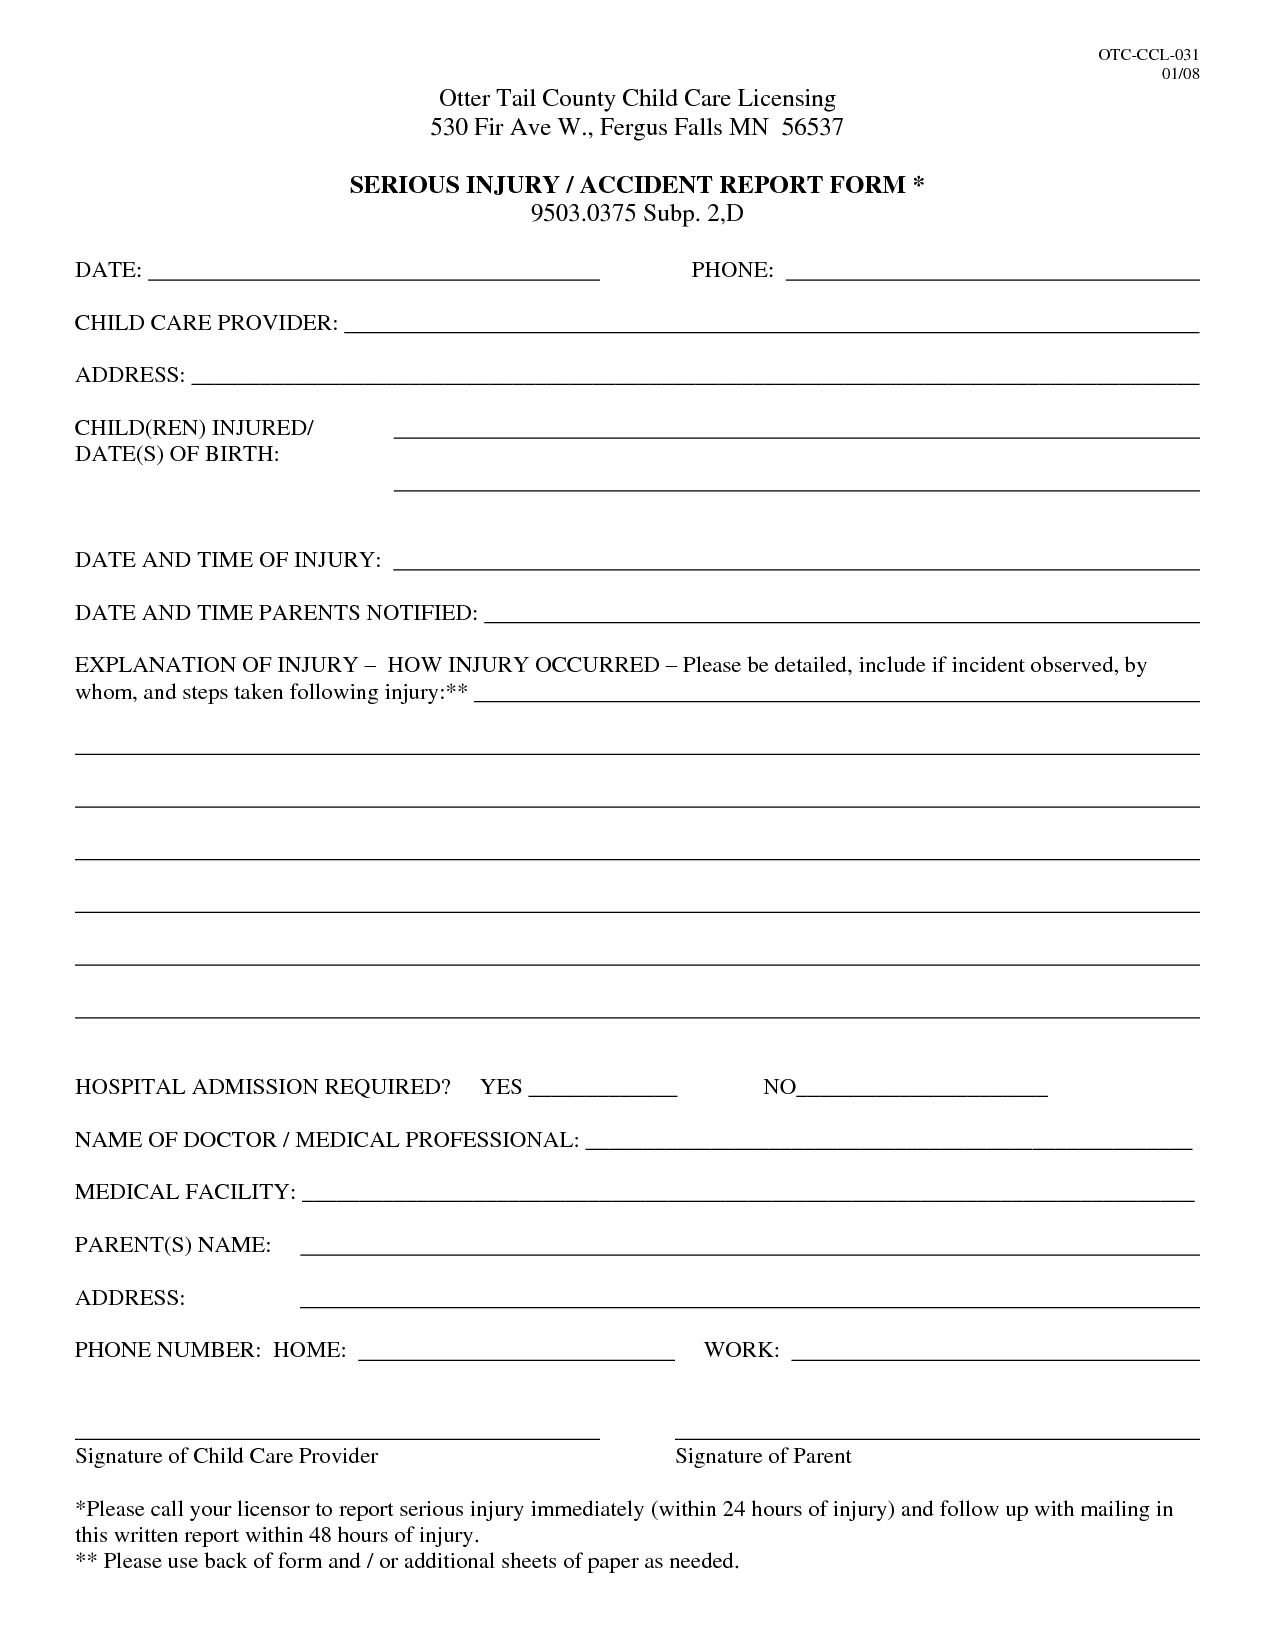 Best Photos Of Patient Injury Incident Report Form Template Within Office Incident Report Template